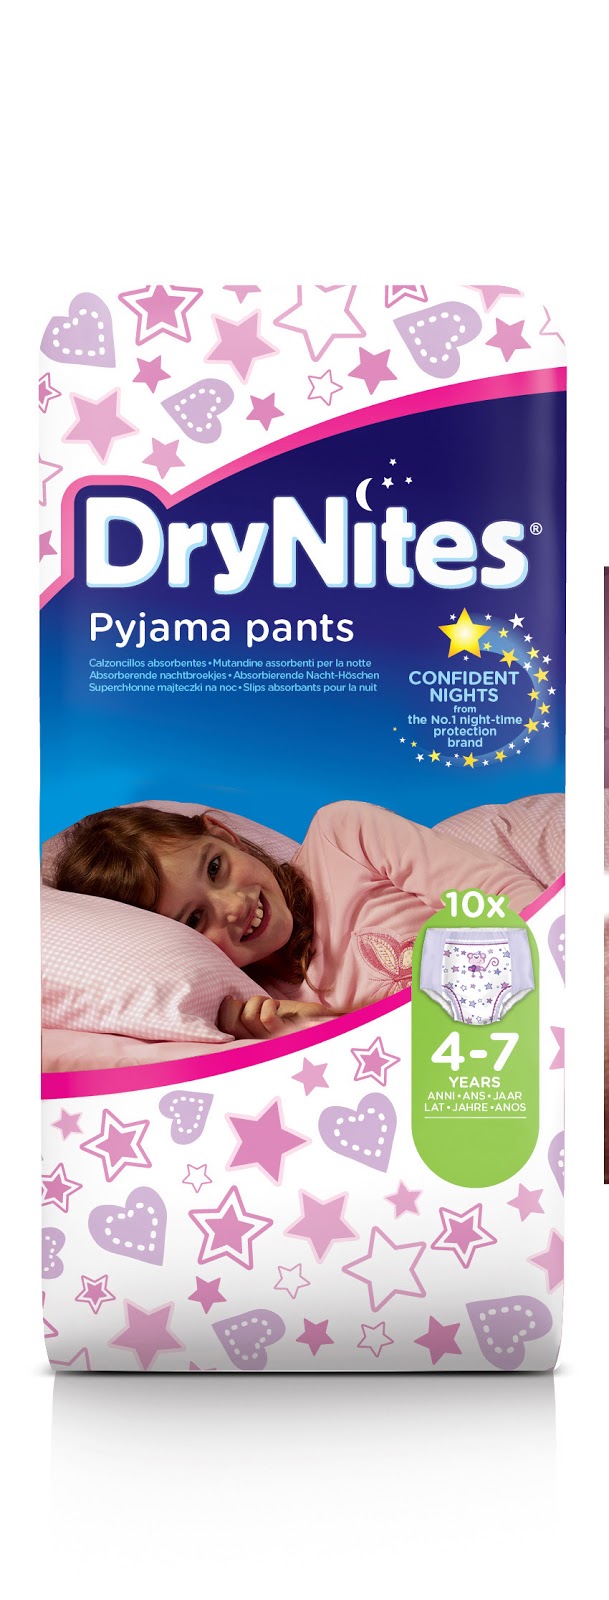 How To Tackle Night Training With DryNites®